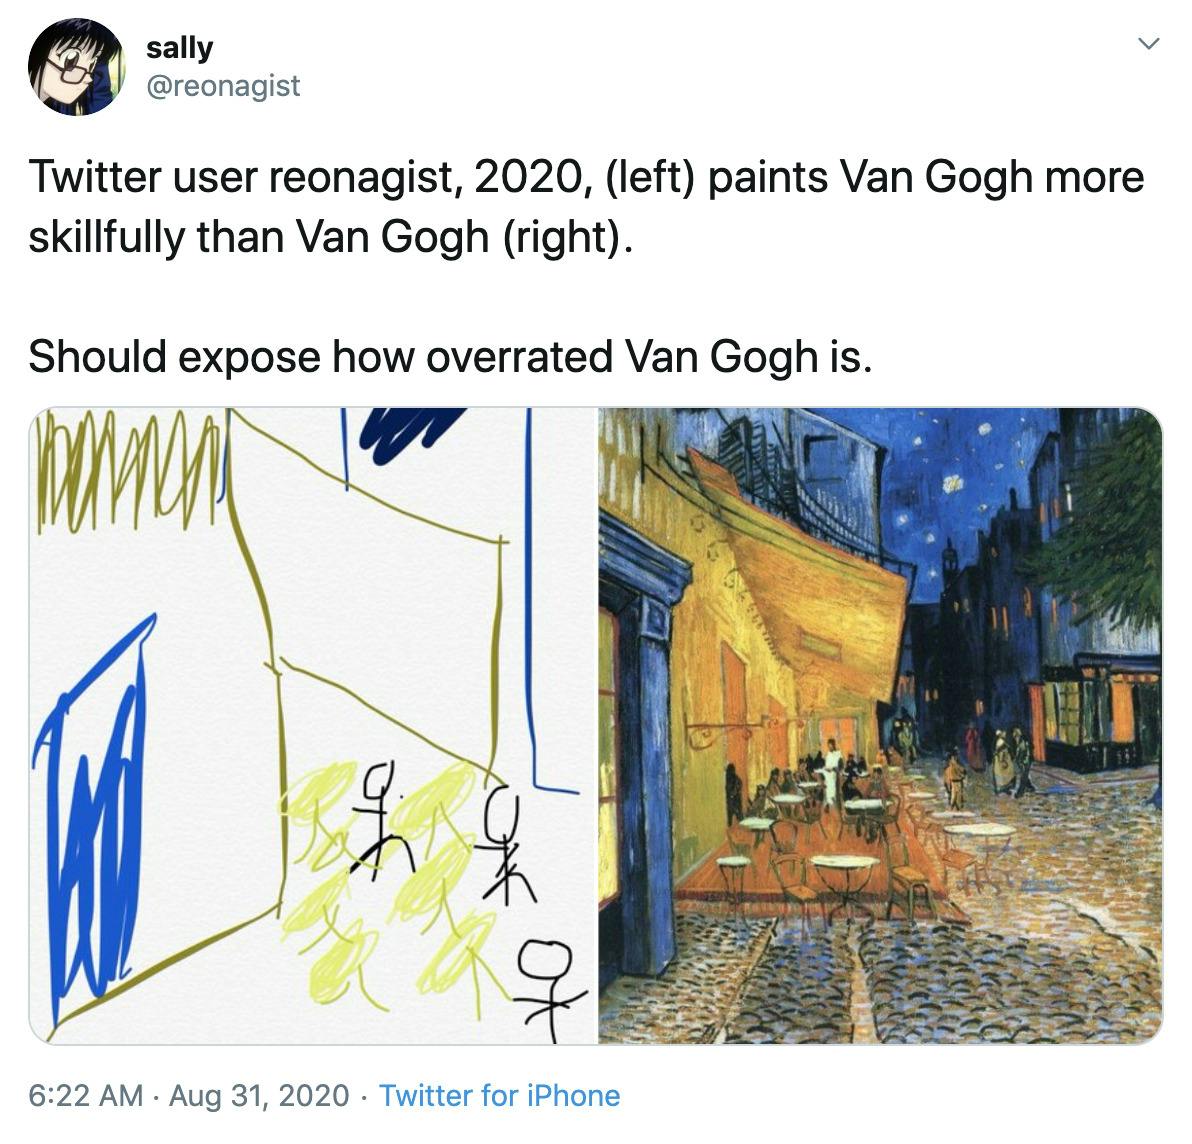 "Twitter user reonagist, 2020, (left) paints Van Gogh more skillfully than Van Gogh (right).  Should expose how overrated Van Gogh is." a scribbled stick figure drawing next to Van Gogh's